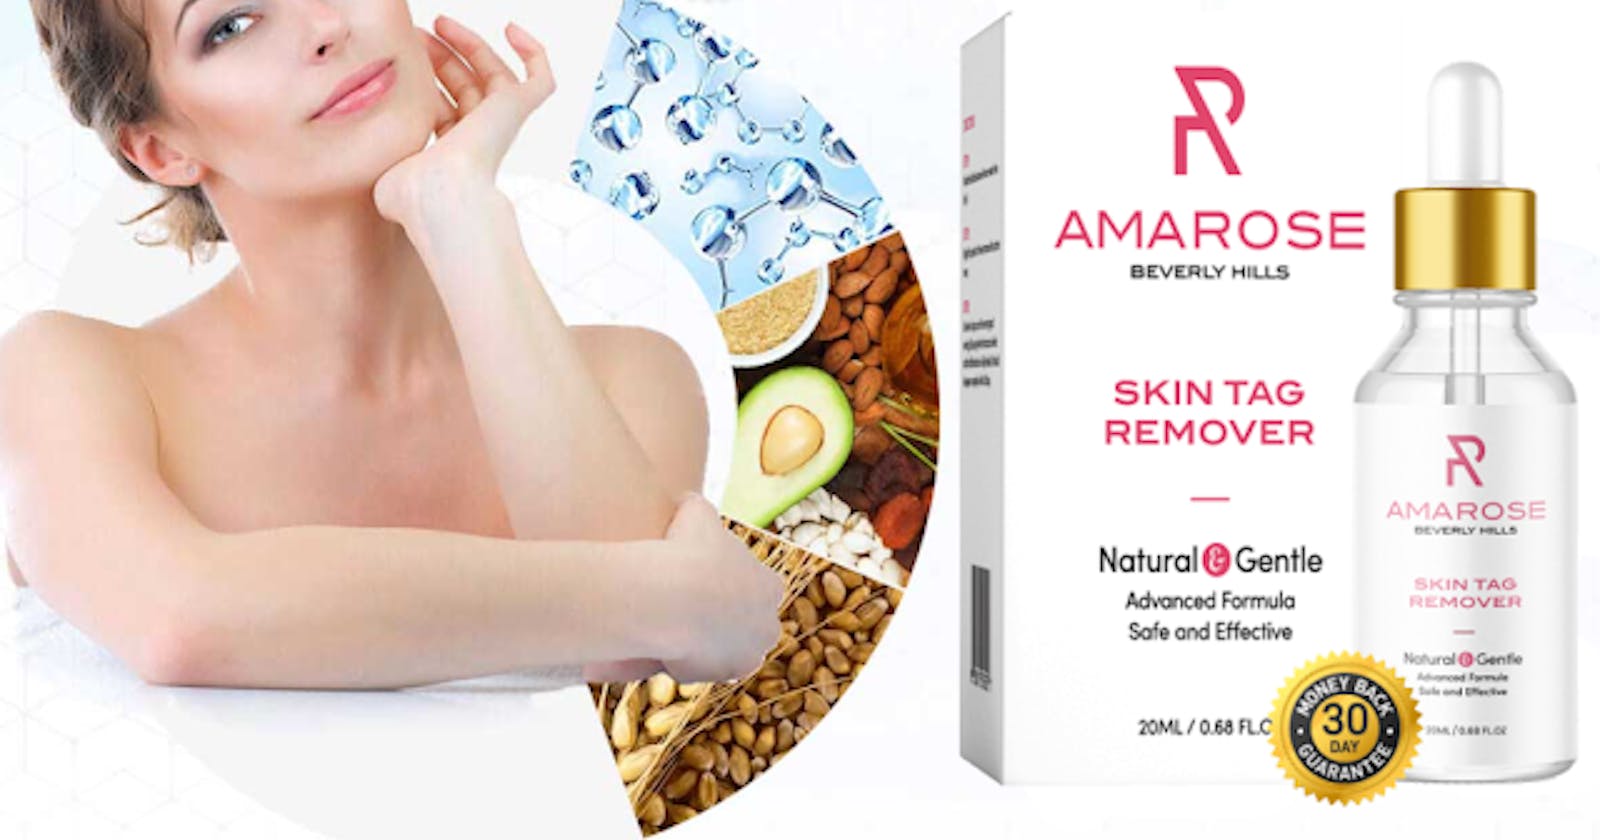 Amarose Skin Tag Remover: (Exposed Updated) Does it Really Work? Scam or Legit 2022!